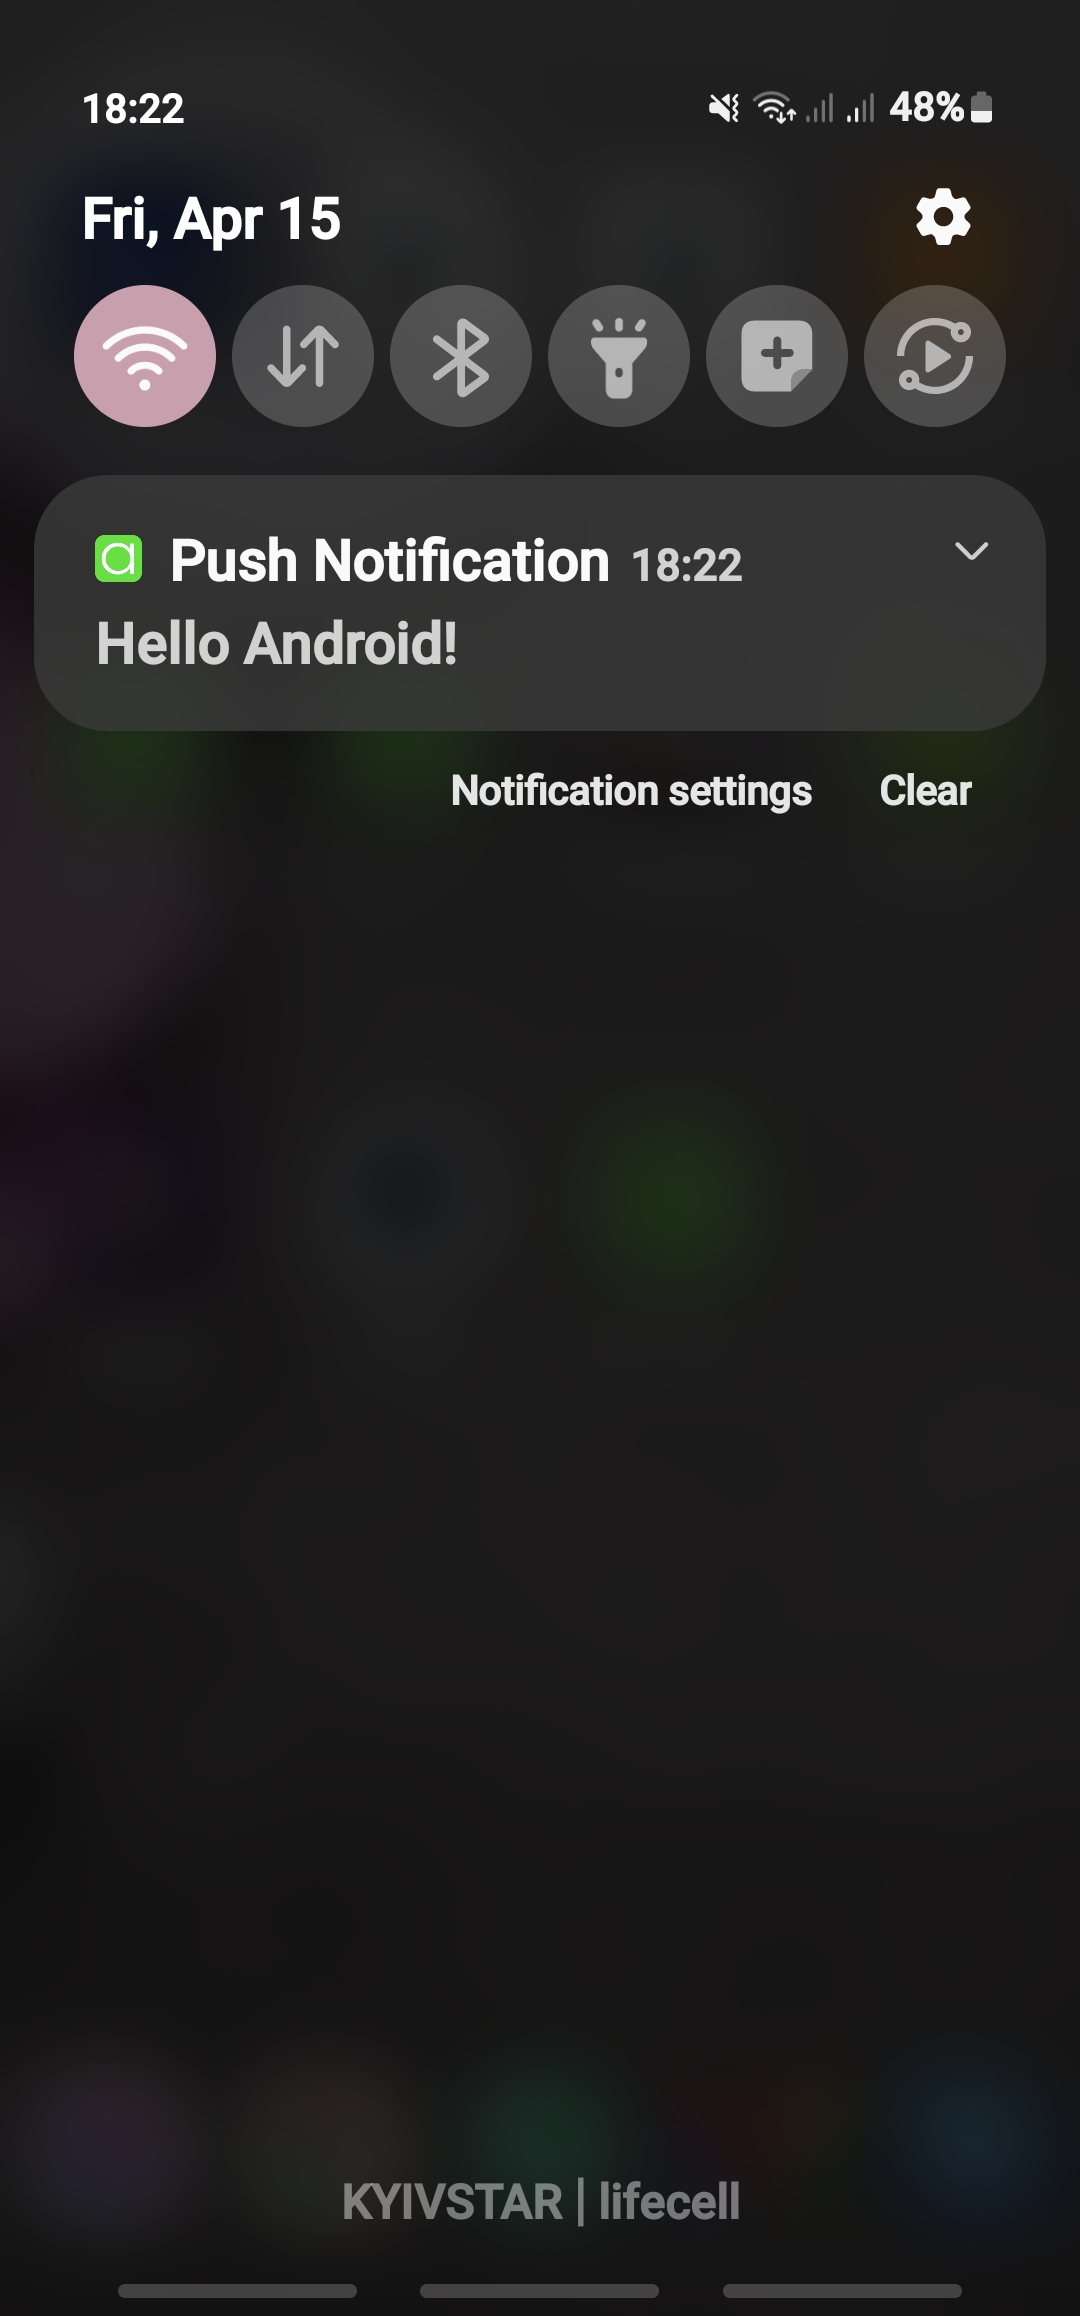 Push notification displayed on the Android device screen